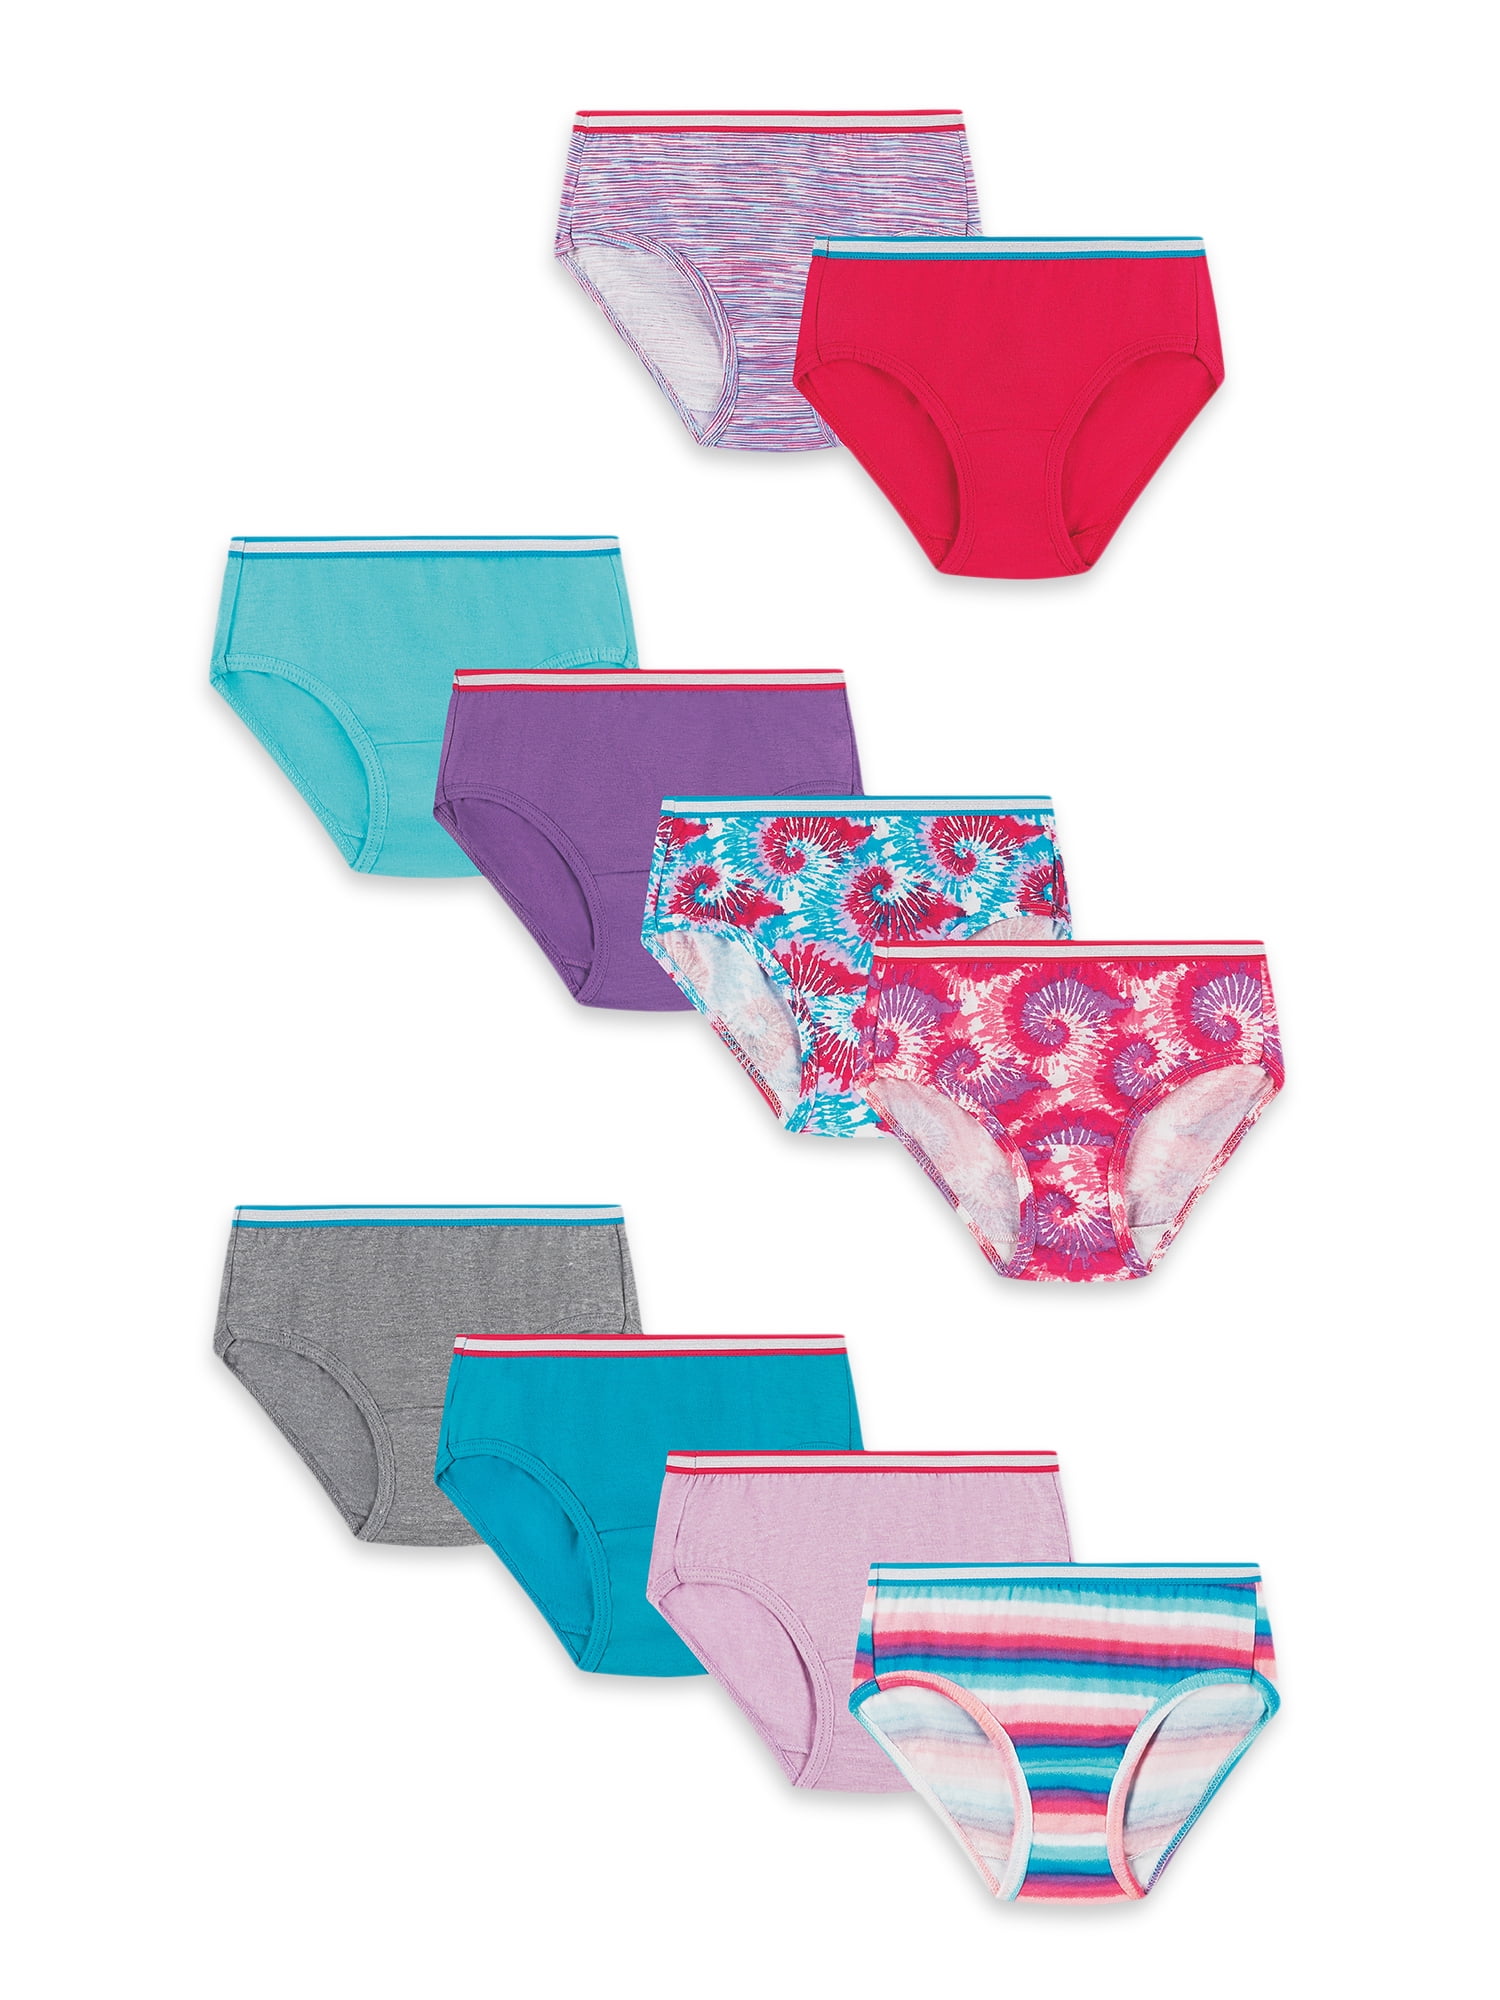 Hanes Girls' Assorted Briefs (Pack of 9) - Size 16, Malaysia